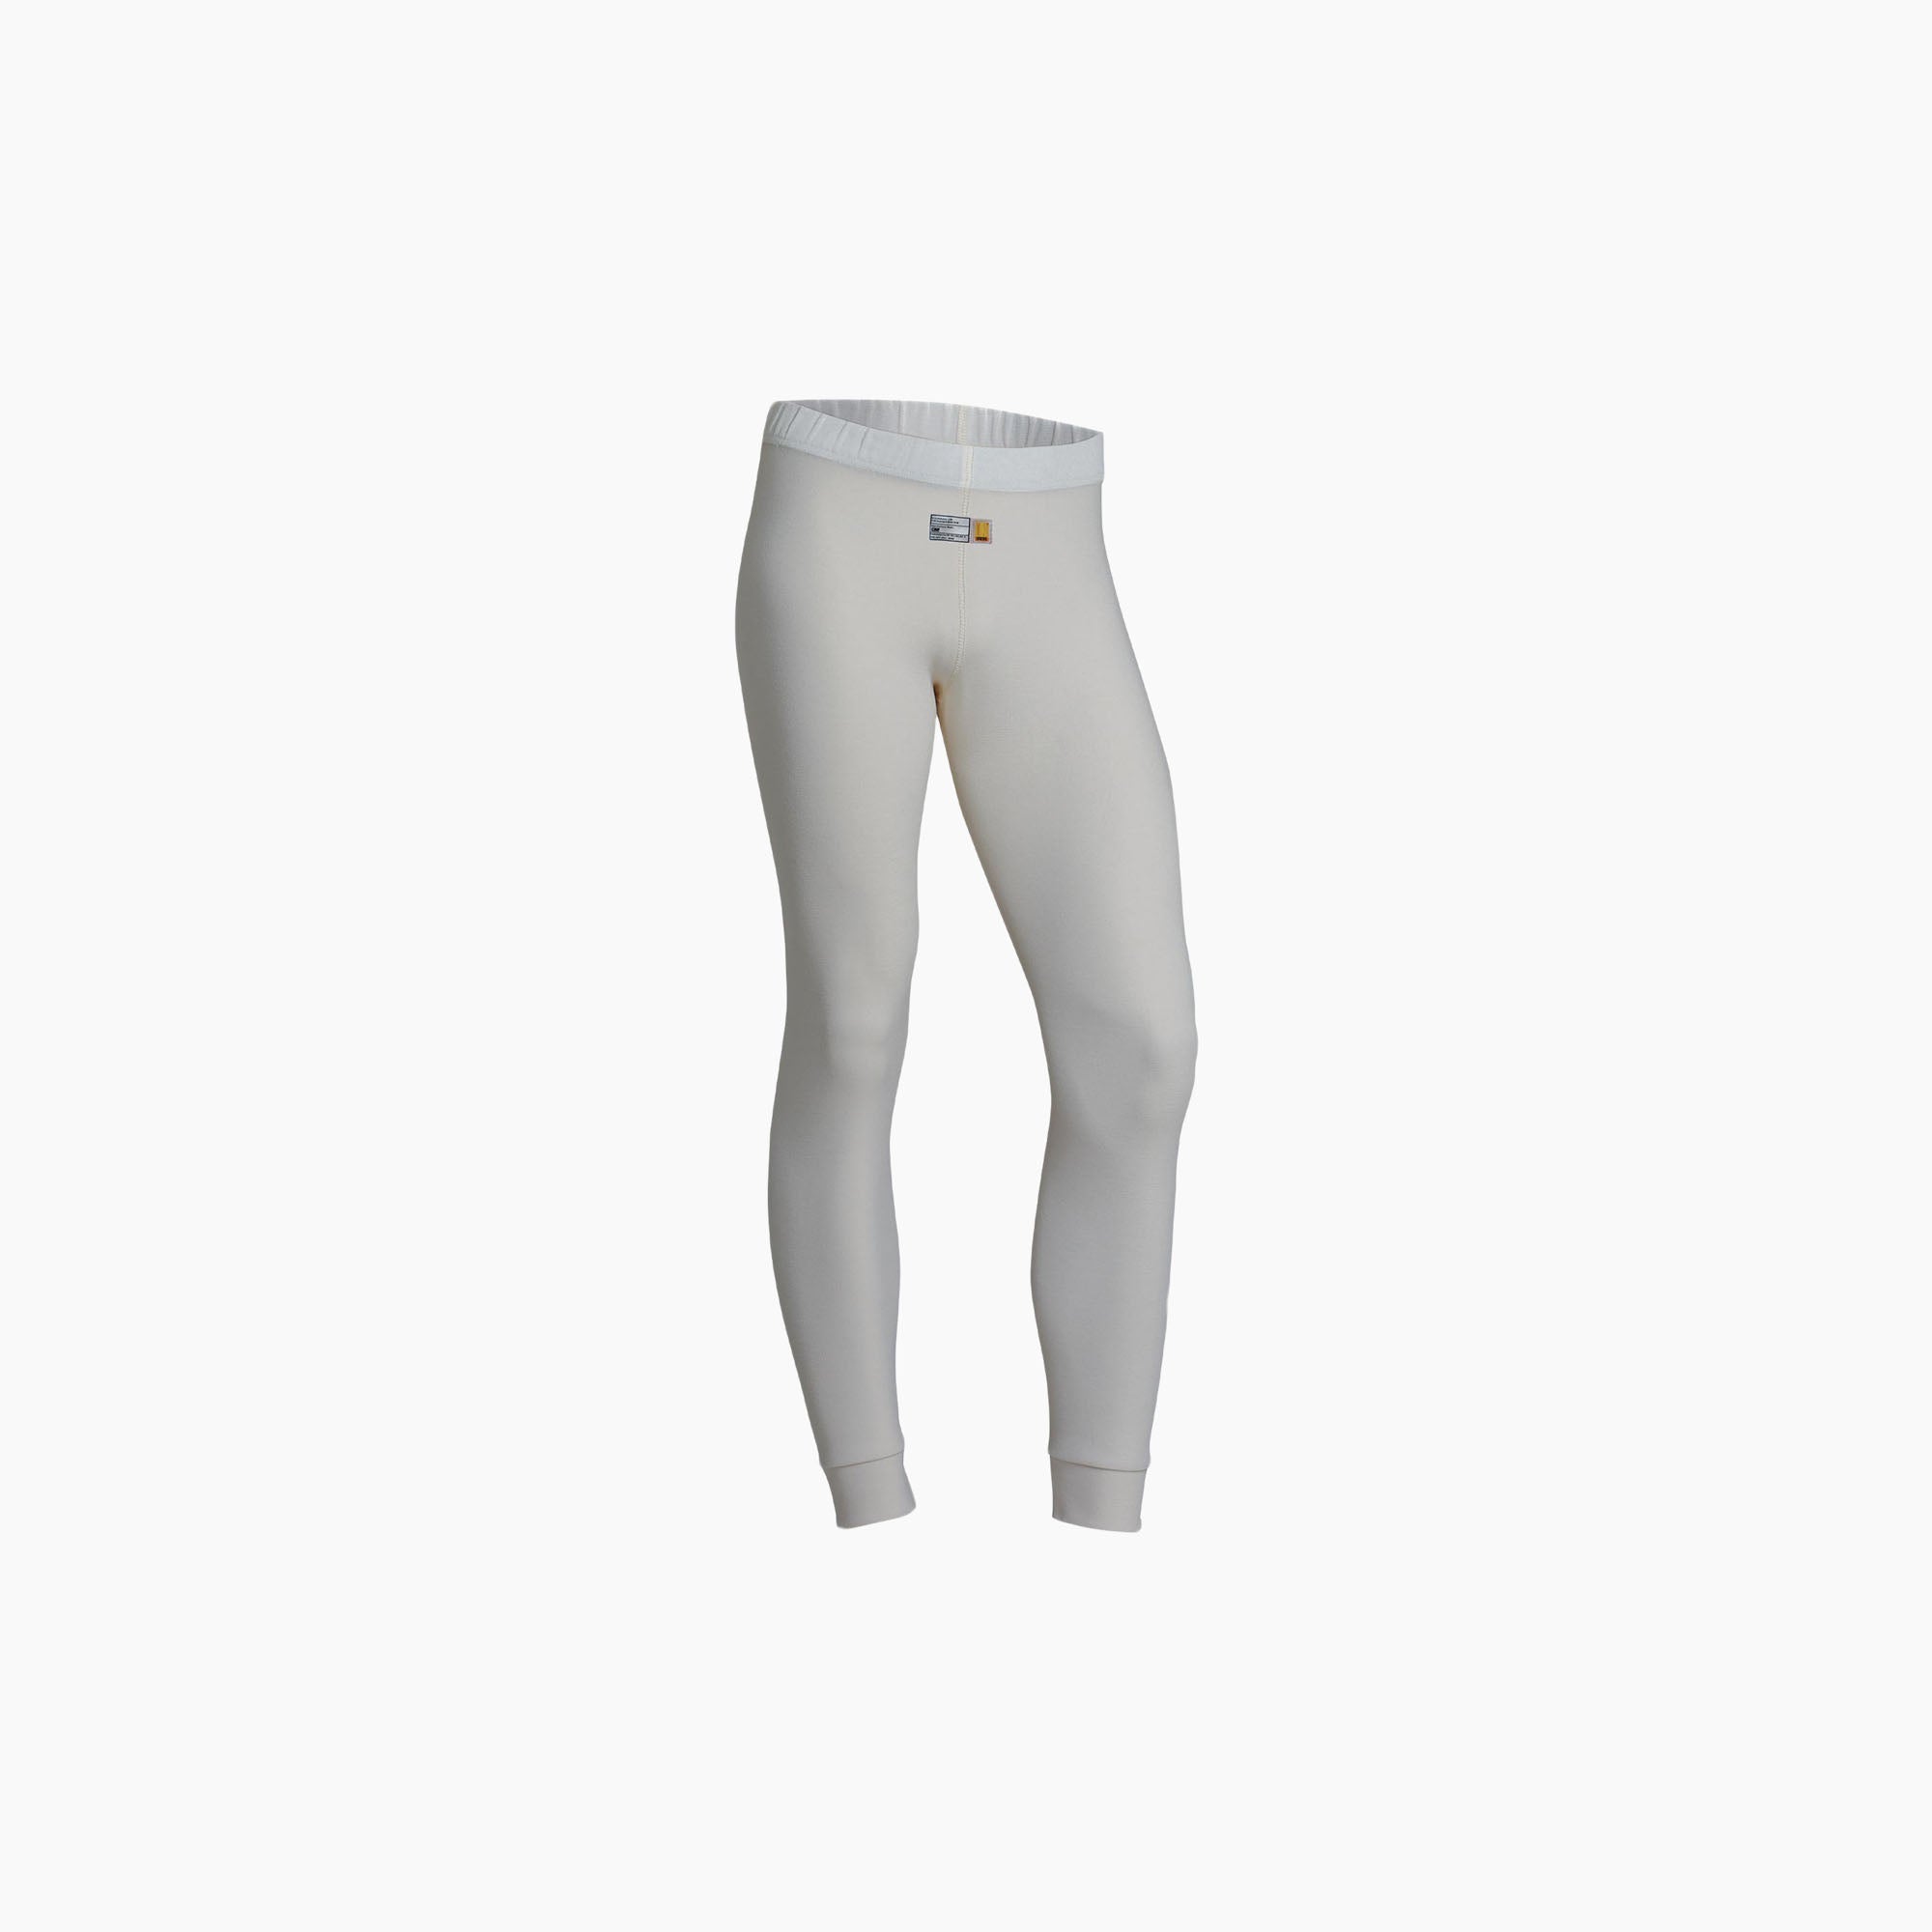 OMP | First Pants - MY2022-Racing Underwear-OMP-gpx-store